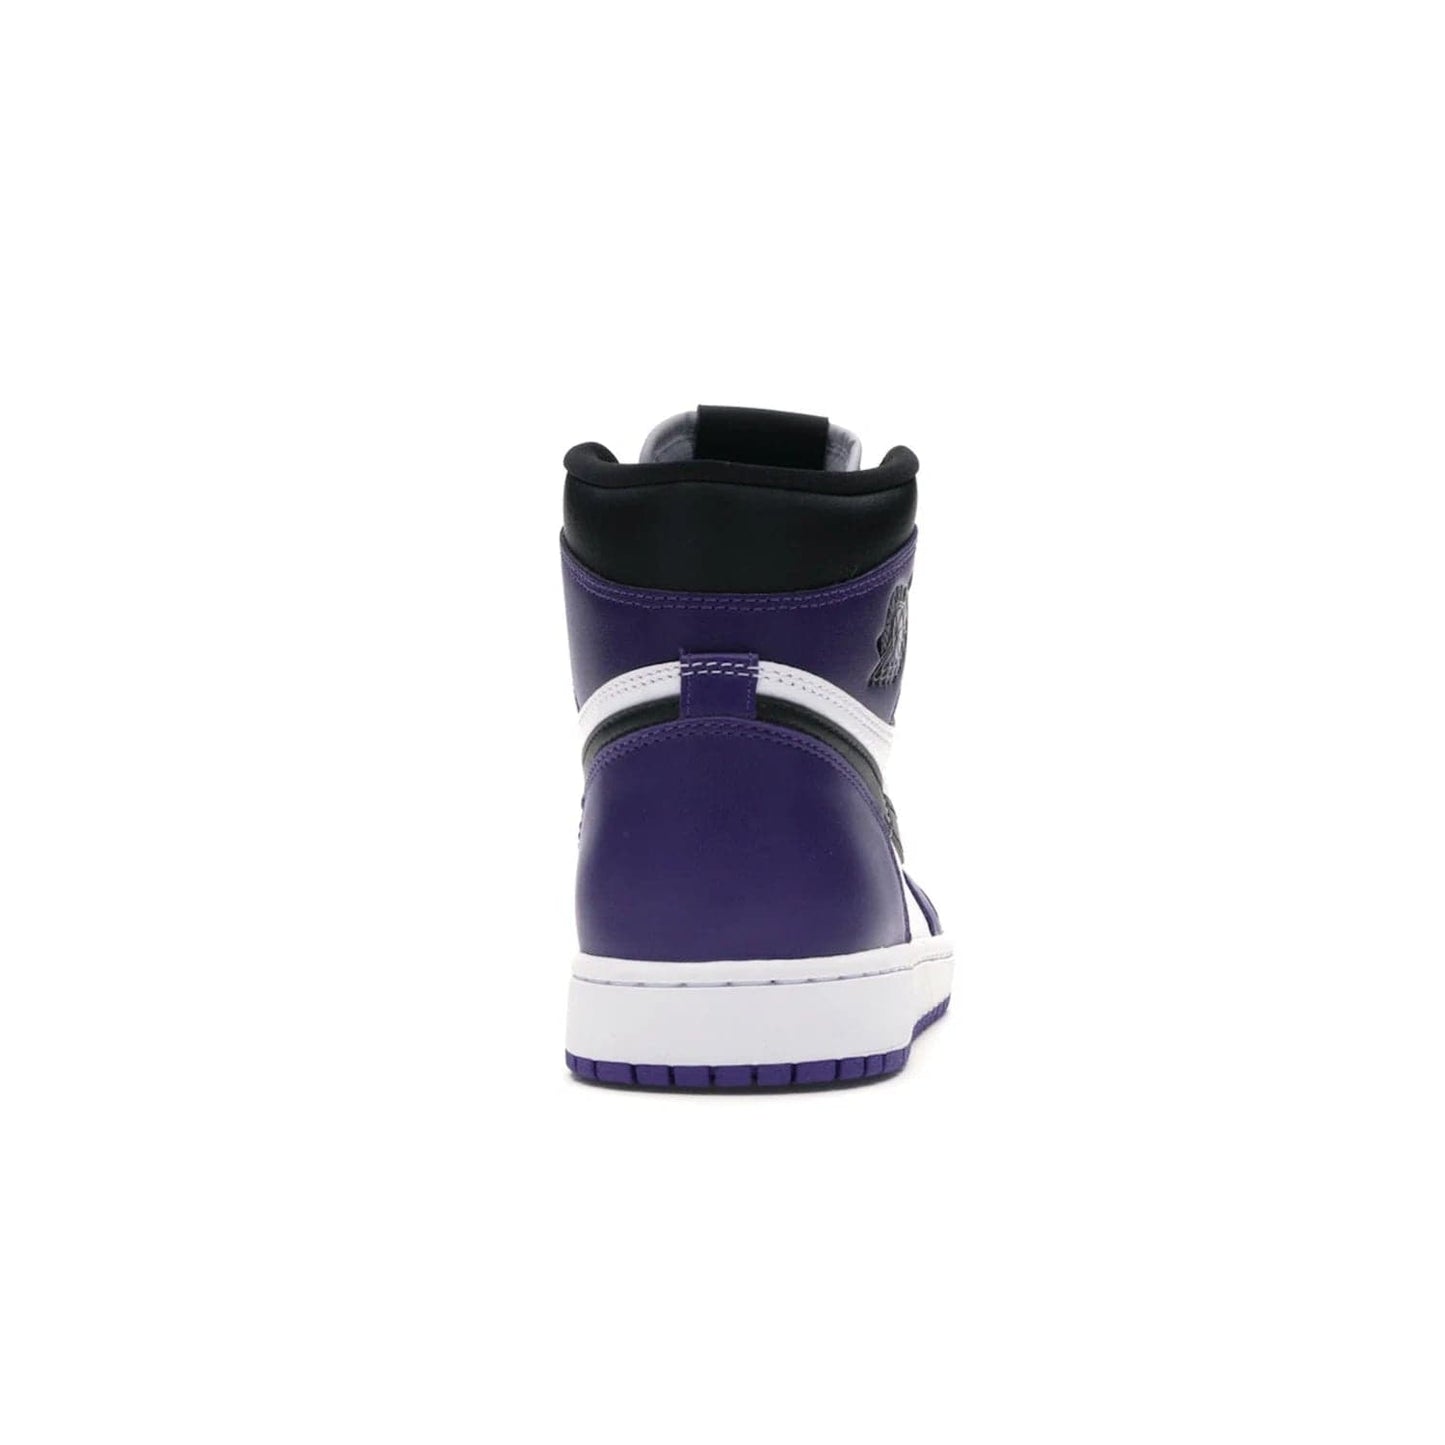 Jordan 1 Retro High Court Purple White - Image 28 - Only at www.BallersClubKickz.com - Grab the classic Jordan 1 Retro High Court Purple White and add major flavor to your collection. White leather upper with Court Purple overlays and Swoosh logo. White midsole and purple outsole. Get yours and rep your Jordan Brand.